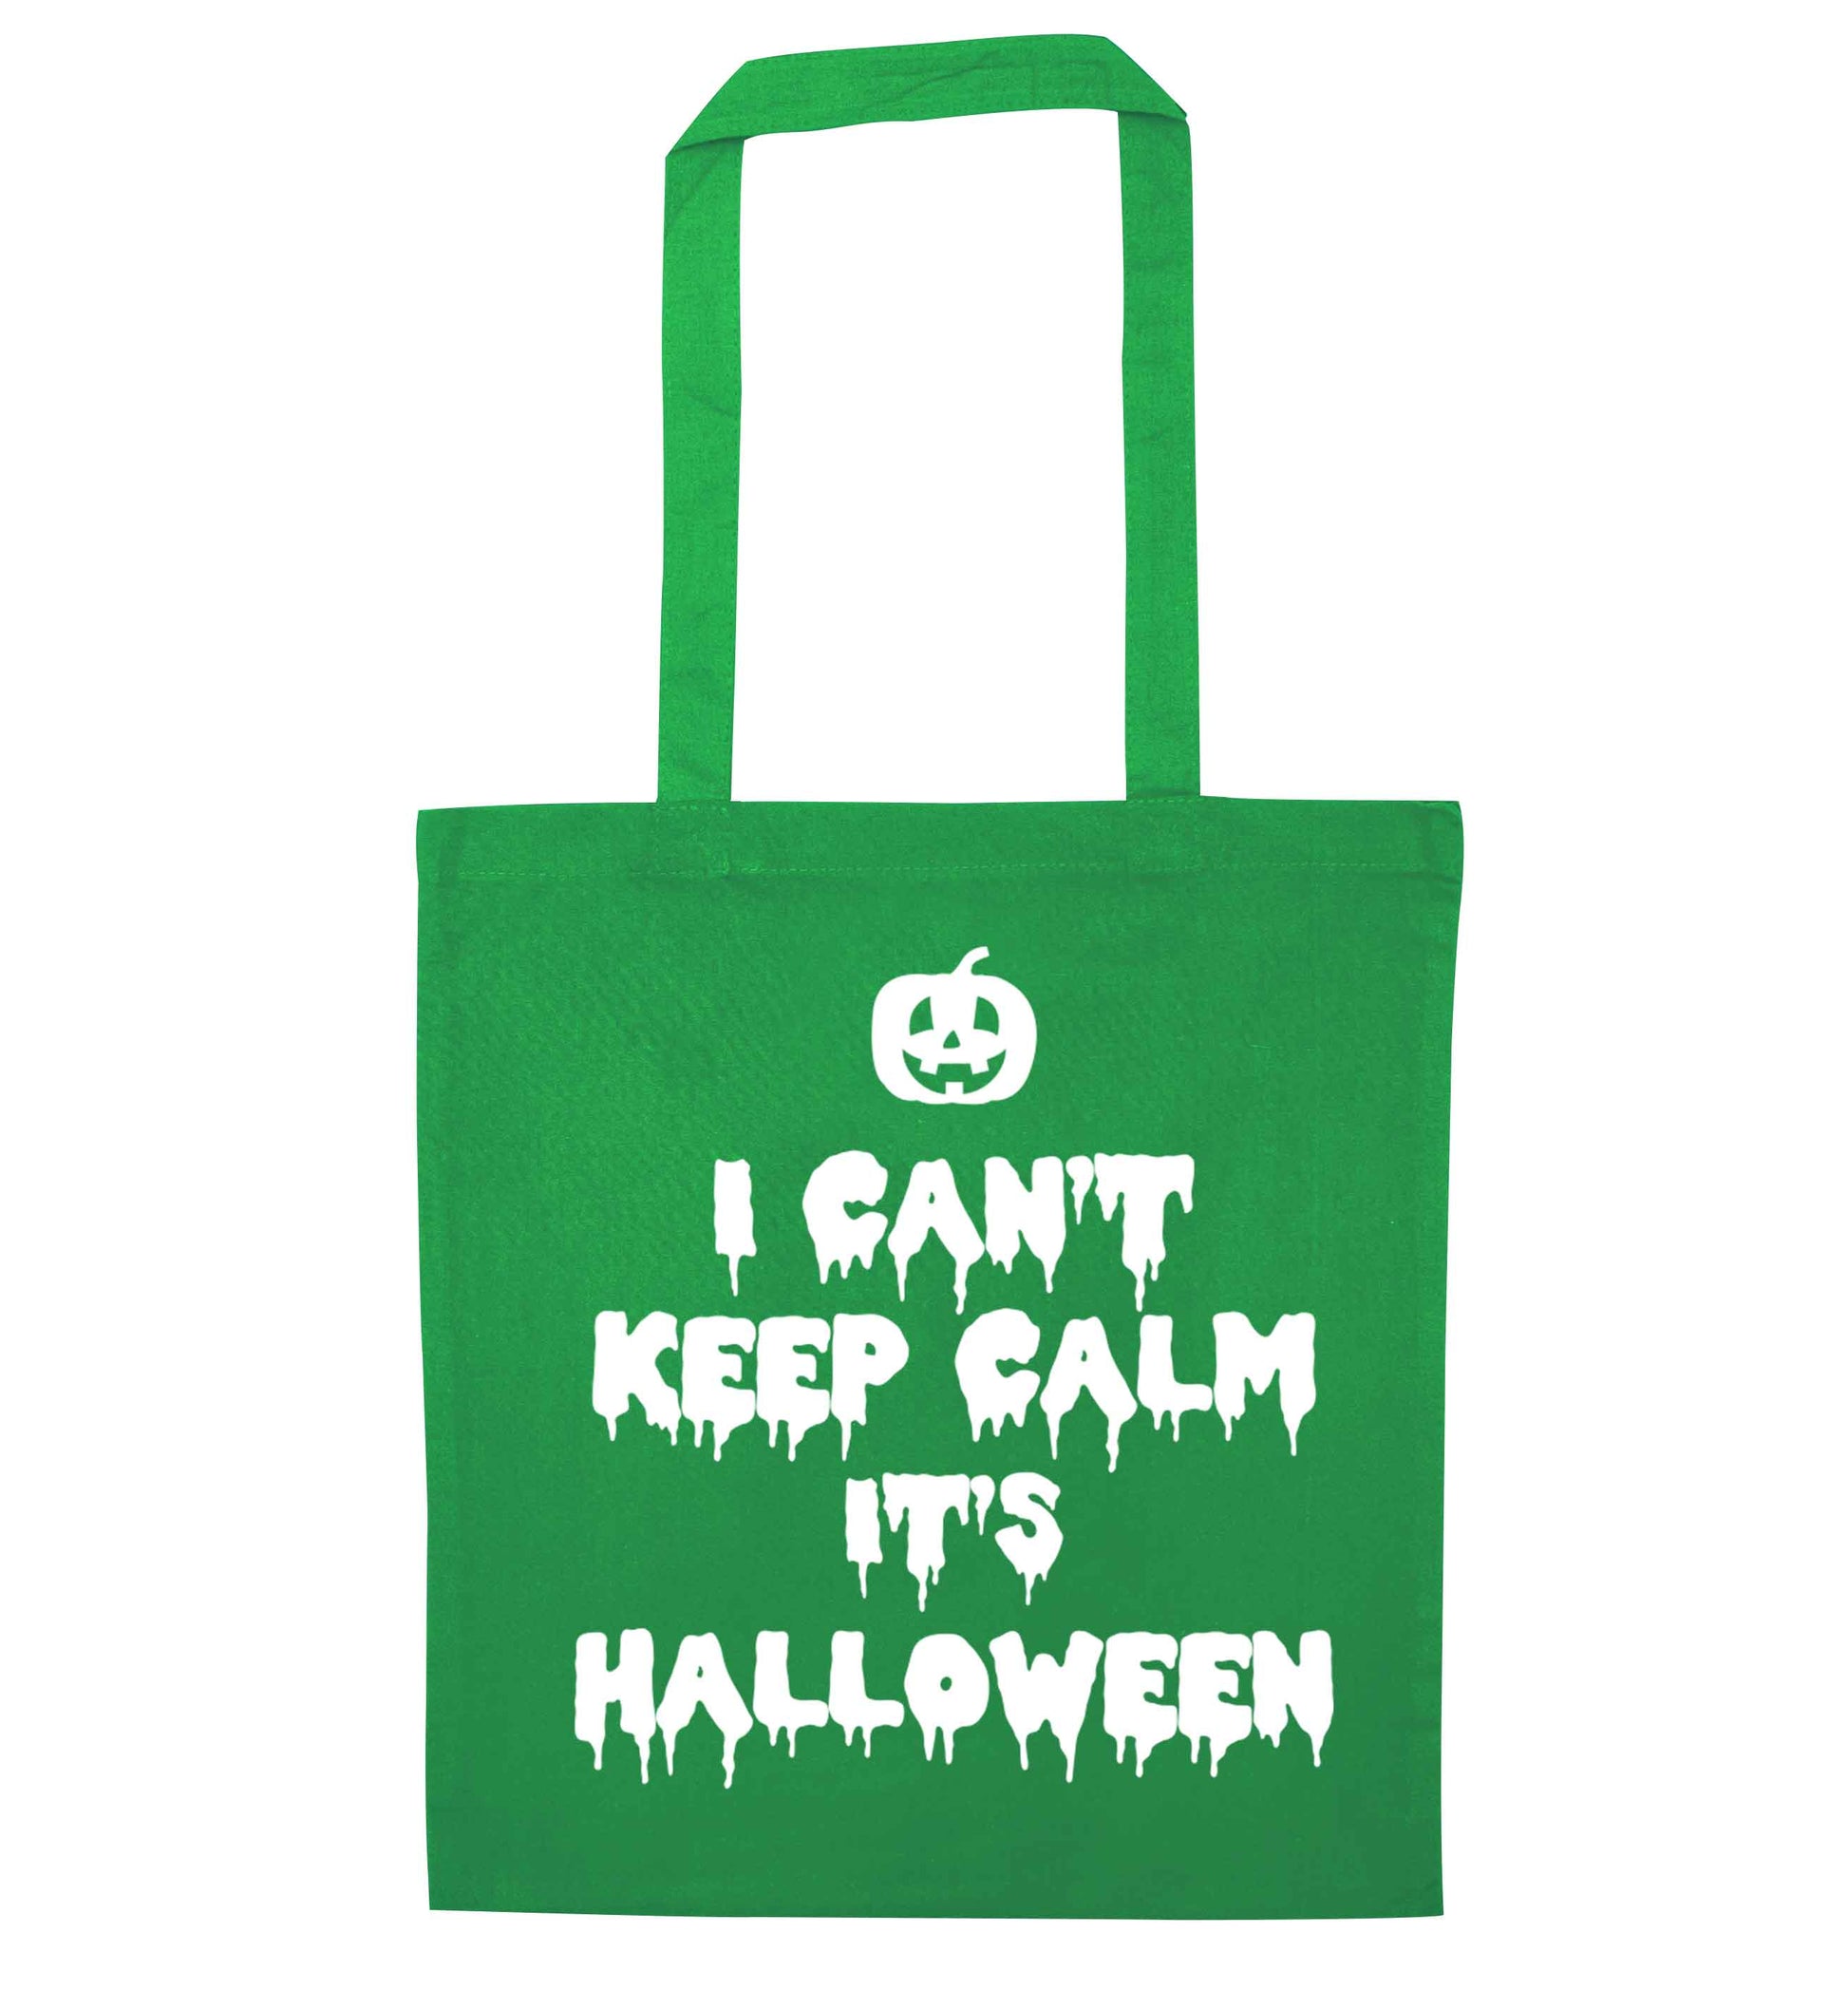 I can't keep calm it's halloween green tote bag